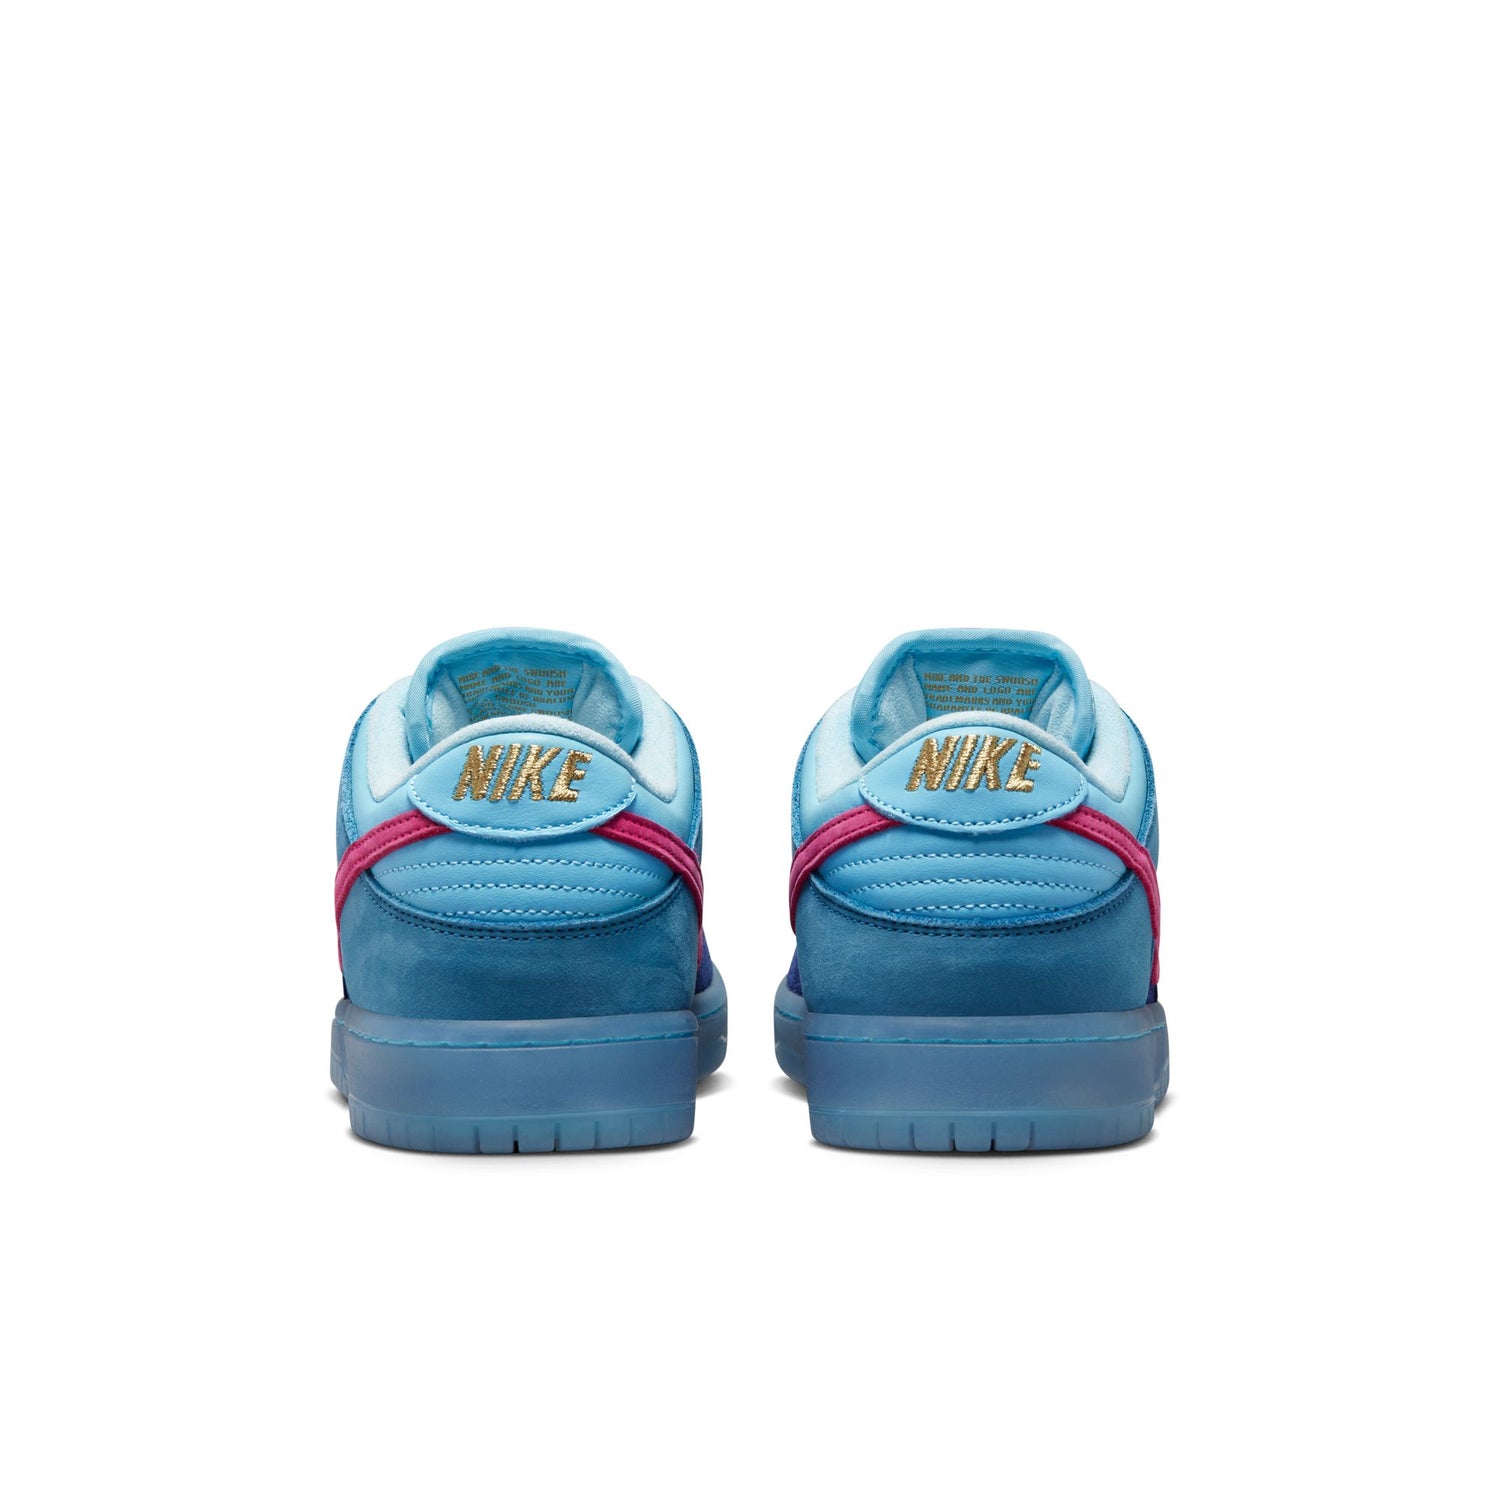 DUNK LOW X RUN THE JEWELS DEEP ROYAL BLUE / ACTIVE PINK - BLUE CHILL